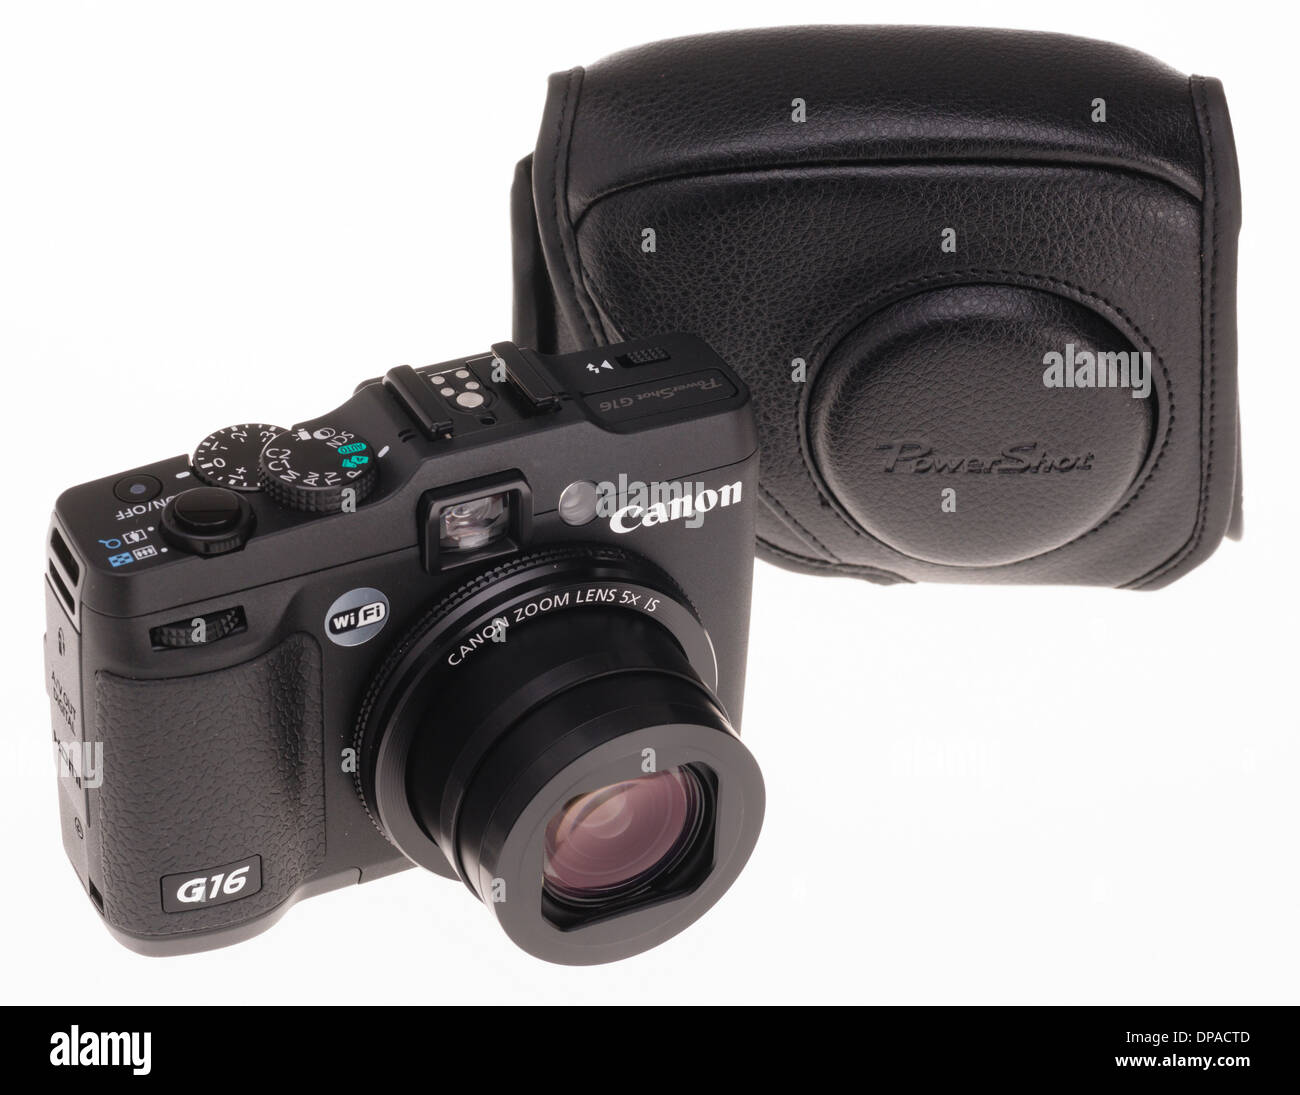 Digital photography equipment - Canon G16 compact camera with WiFi function Stock Photo